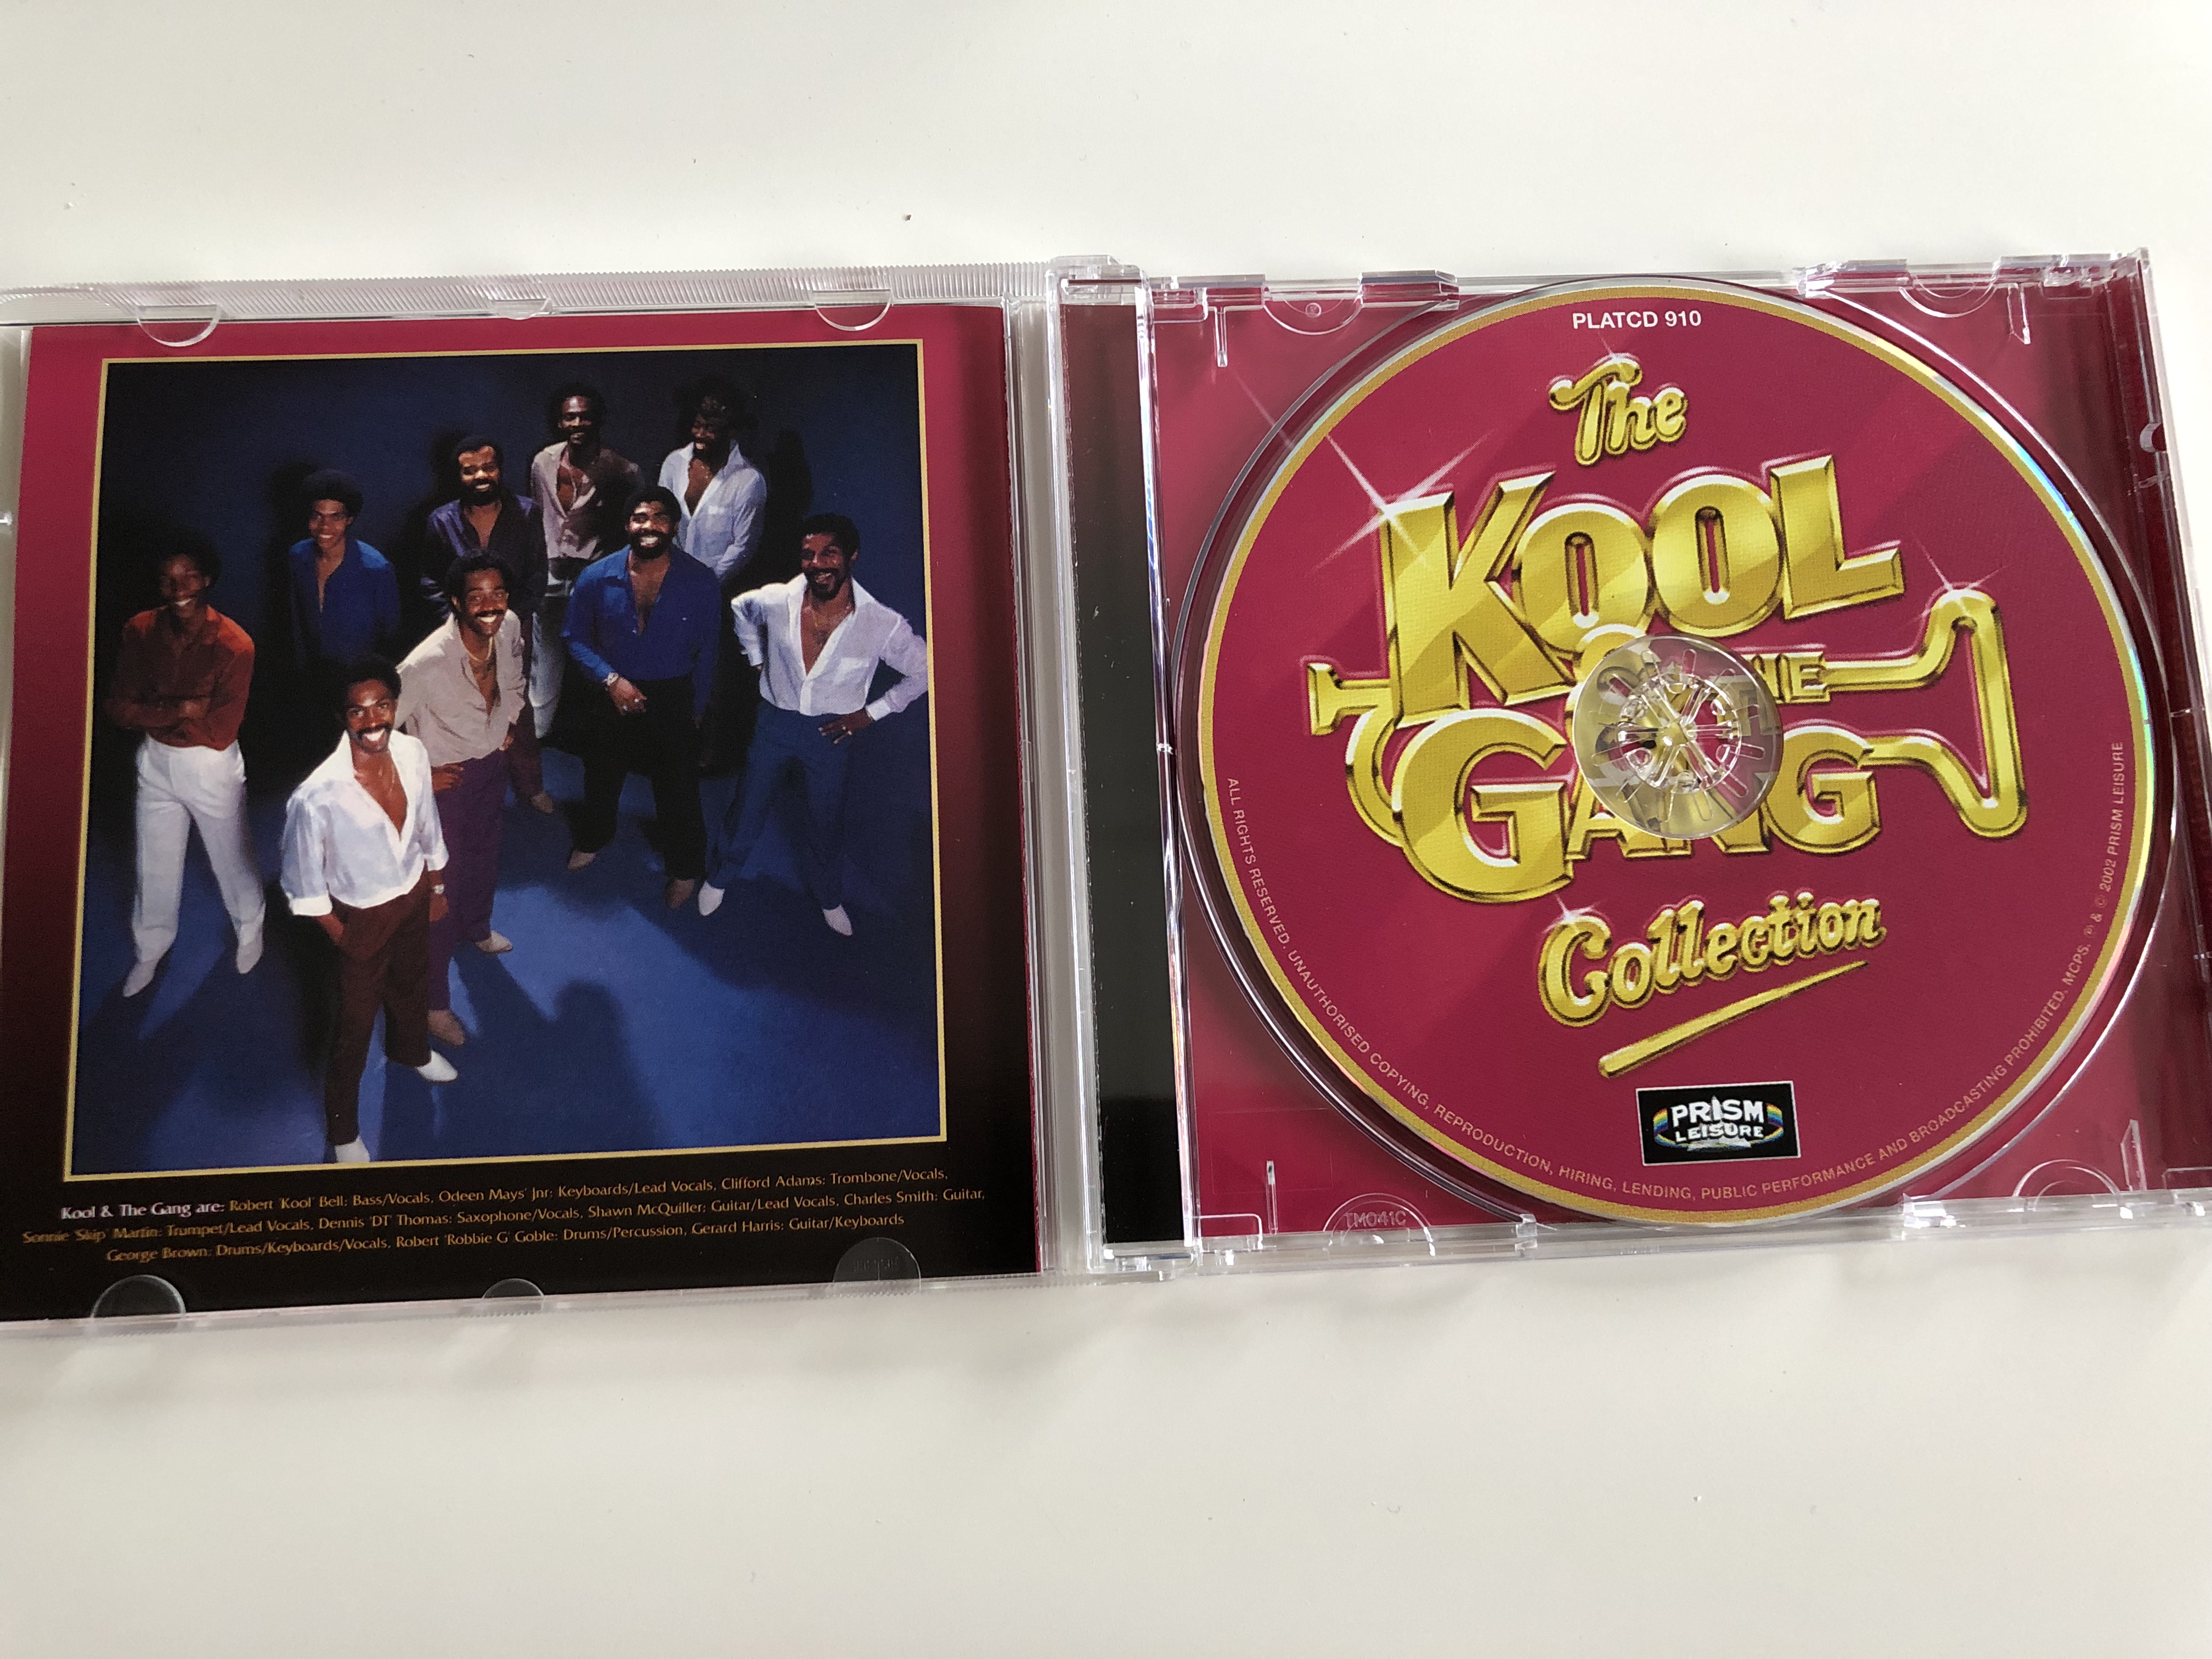 the-kool-the-gang-collection-live-in-concert-audio-cd-2002-platcd-910-3-.jpg